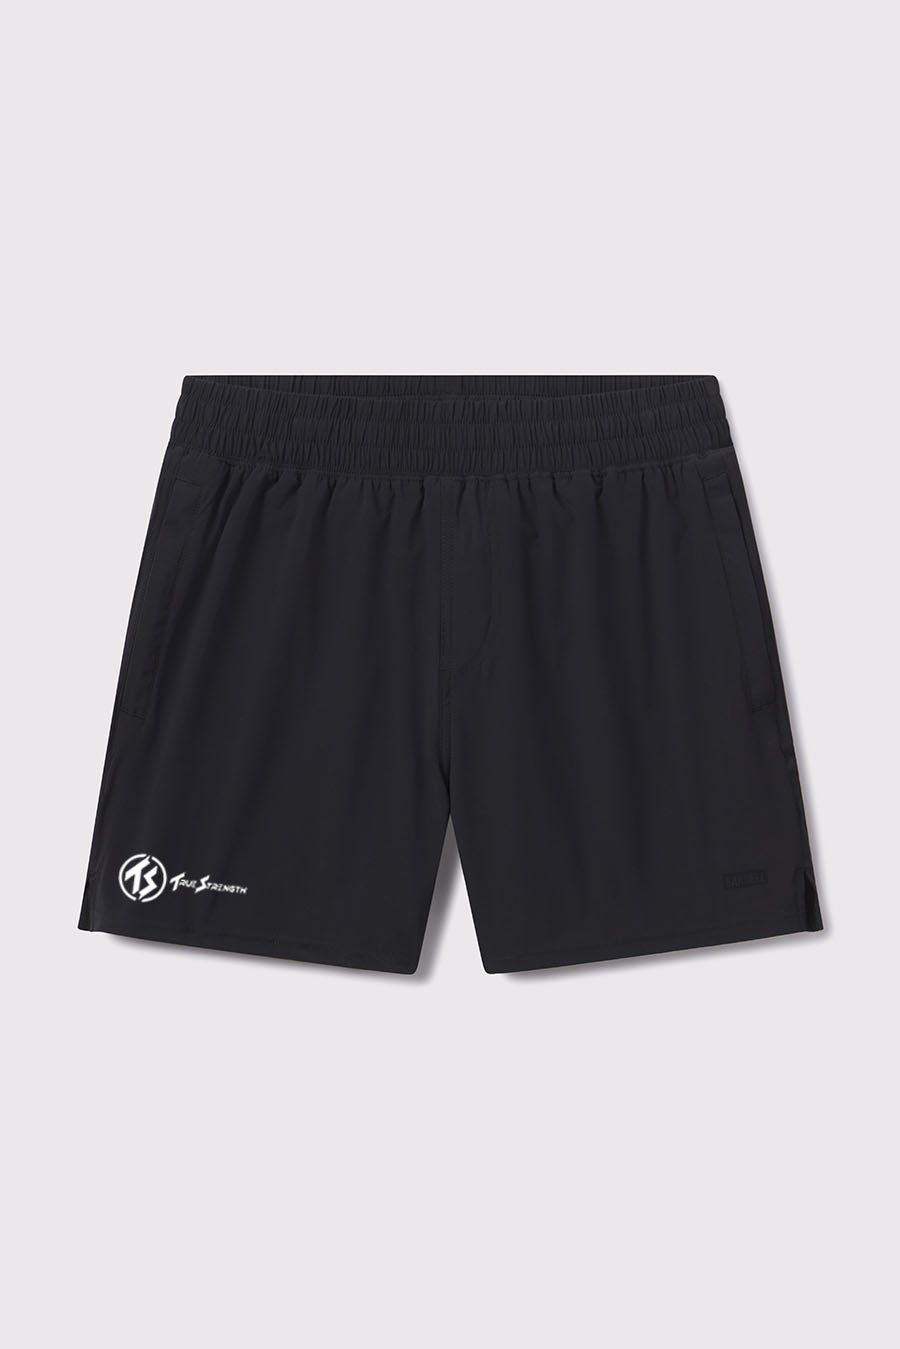 Shuck Ranger Short - Black - photo from front flat lay #color_black